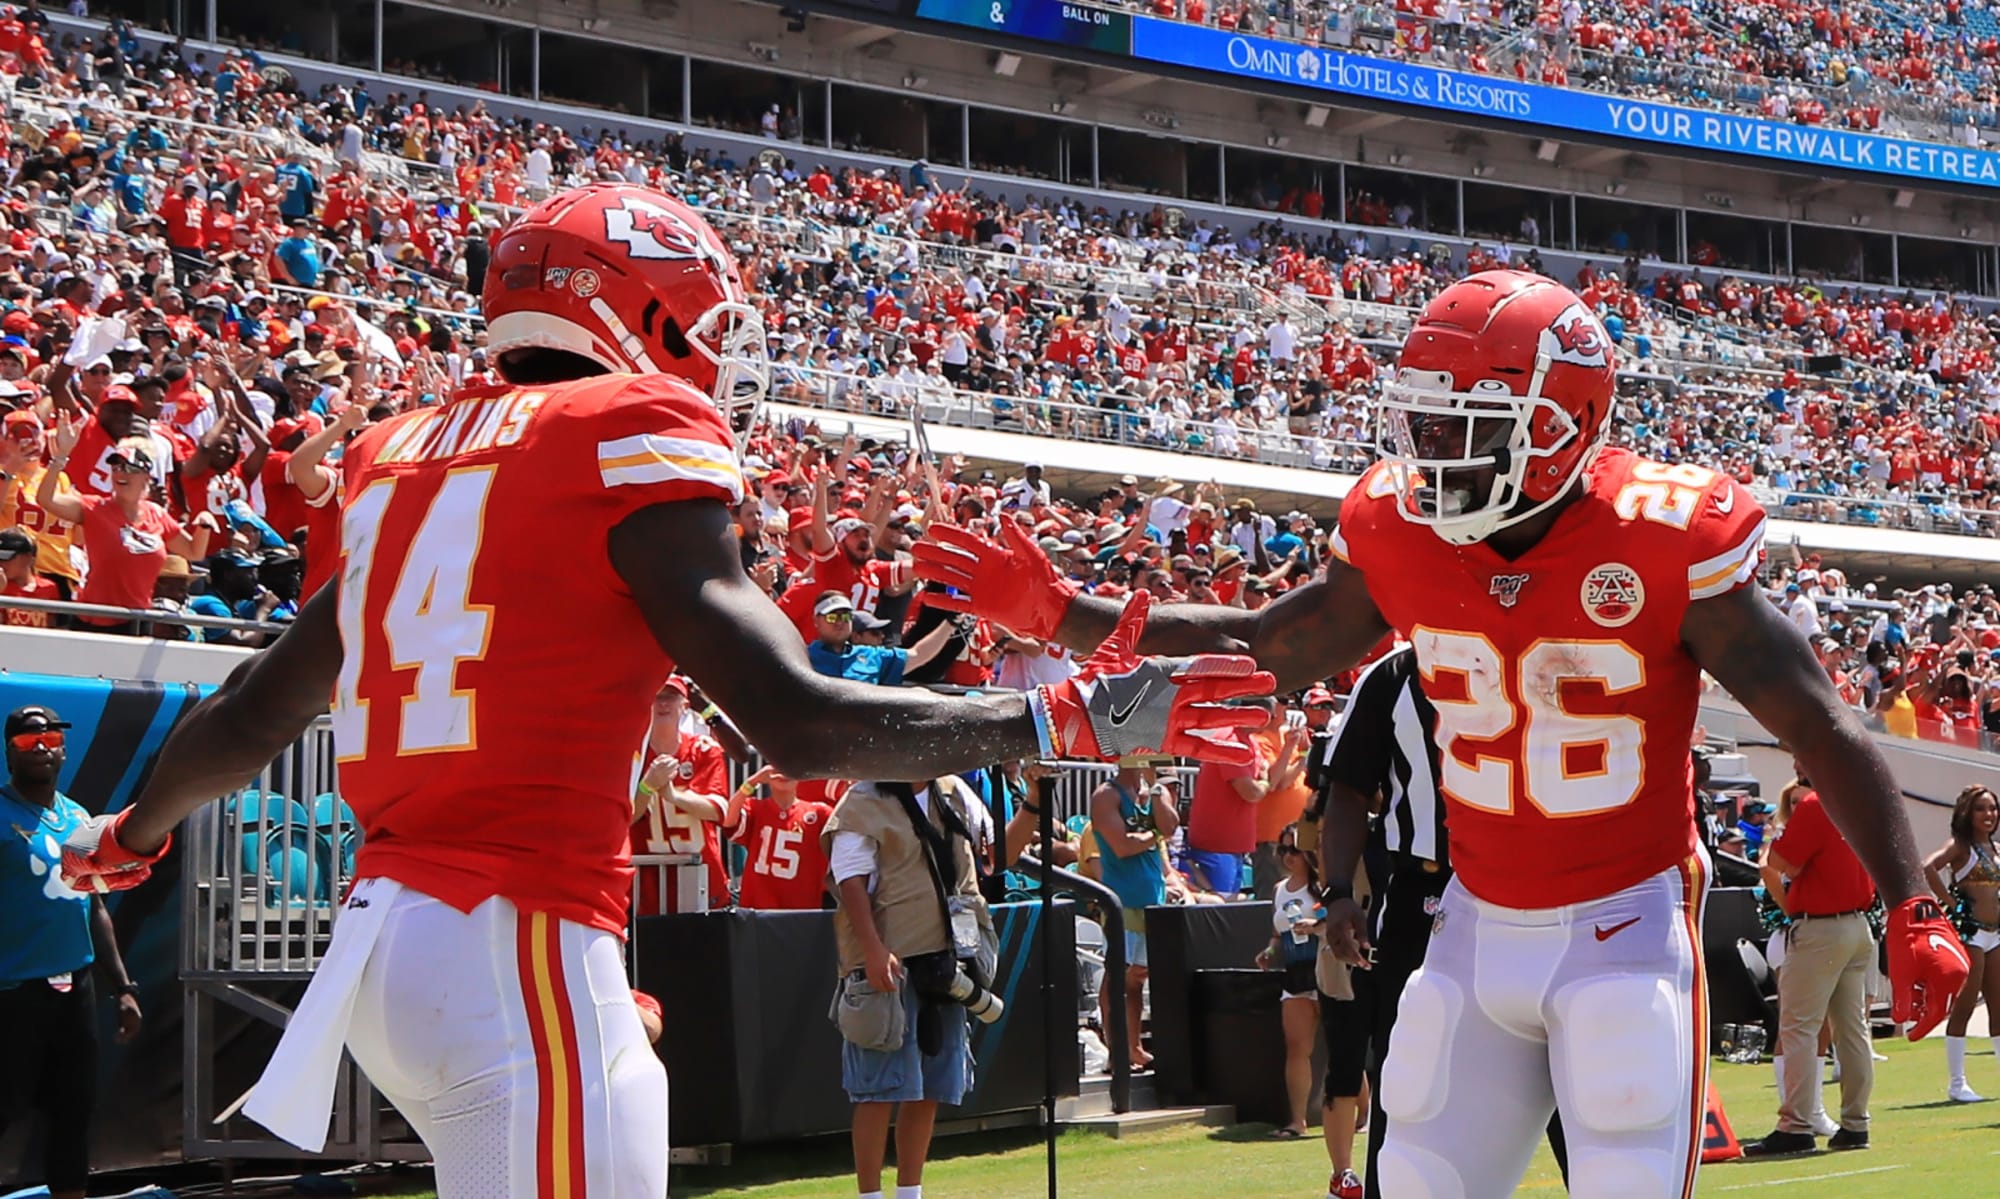 Kansas City Chiefs dominant on offense in week one victory vs Jaguars